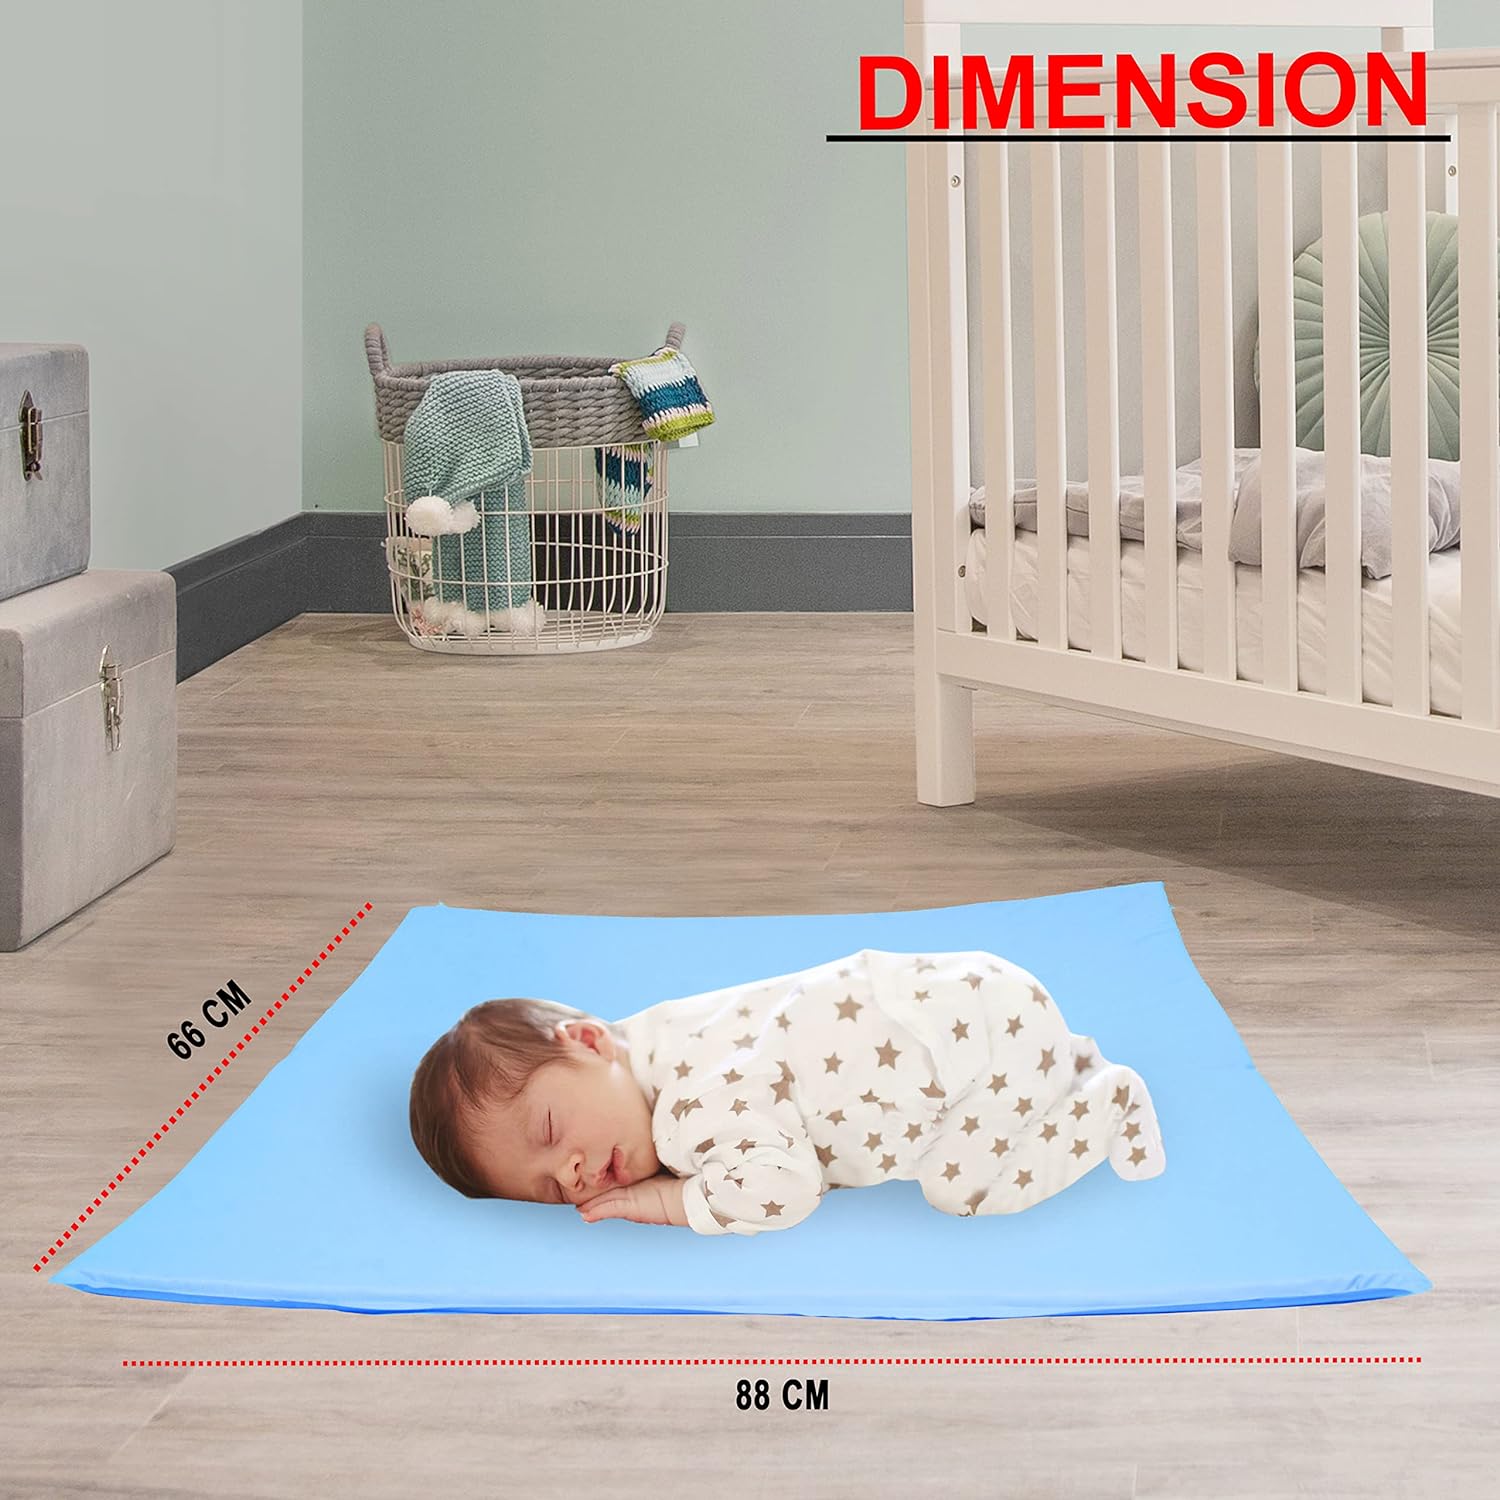 Baby Bed Protector Waterproof Plastic Urine Matress Protector/Baby Diaper Changing Soft Foam 12mm/for 0-12 Months Baby.